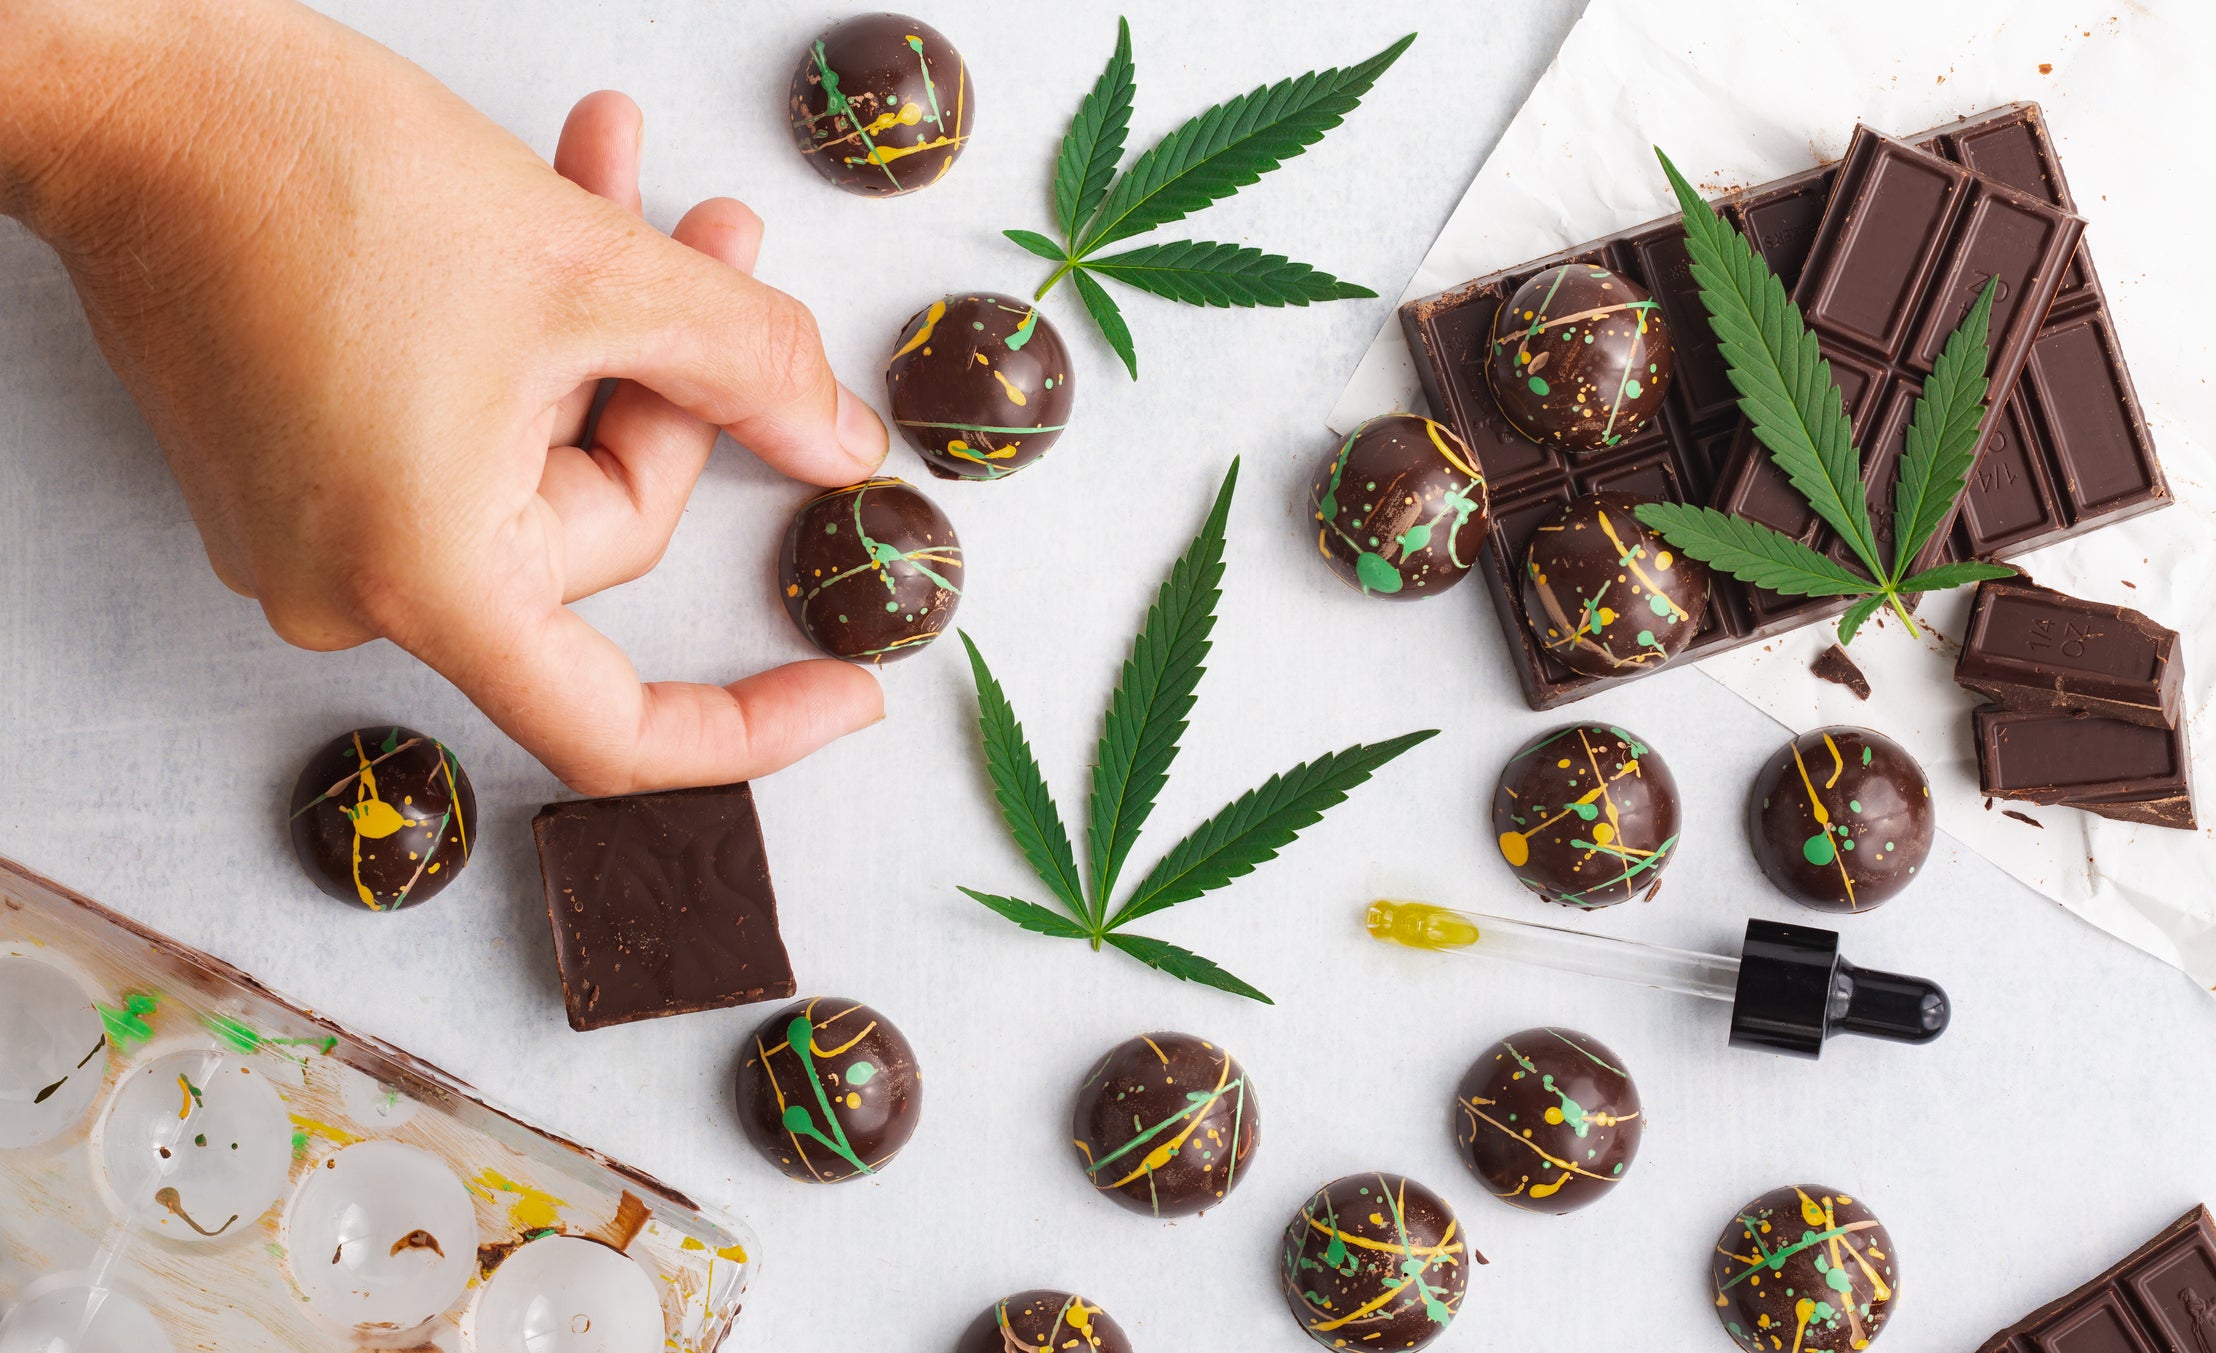 6 Things You Should Know About Cannabis Edibles